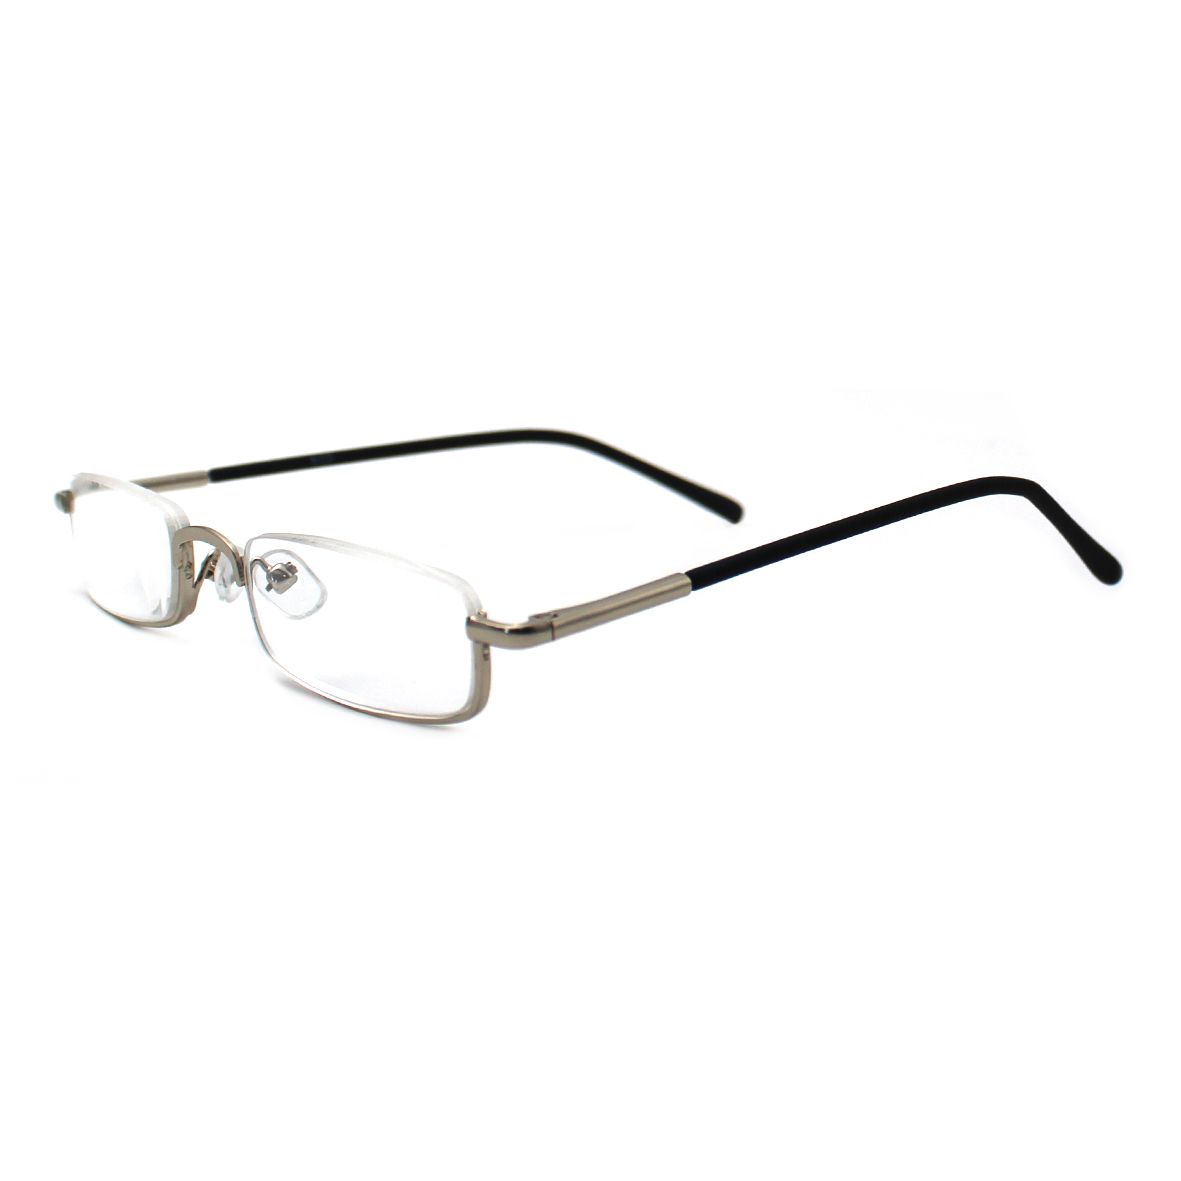 X-tra Vision Top Rimless Reading Glasses - Nico | Buy Online in South ...